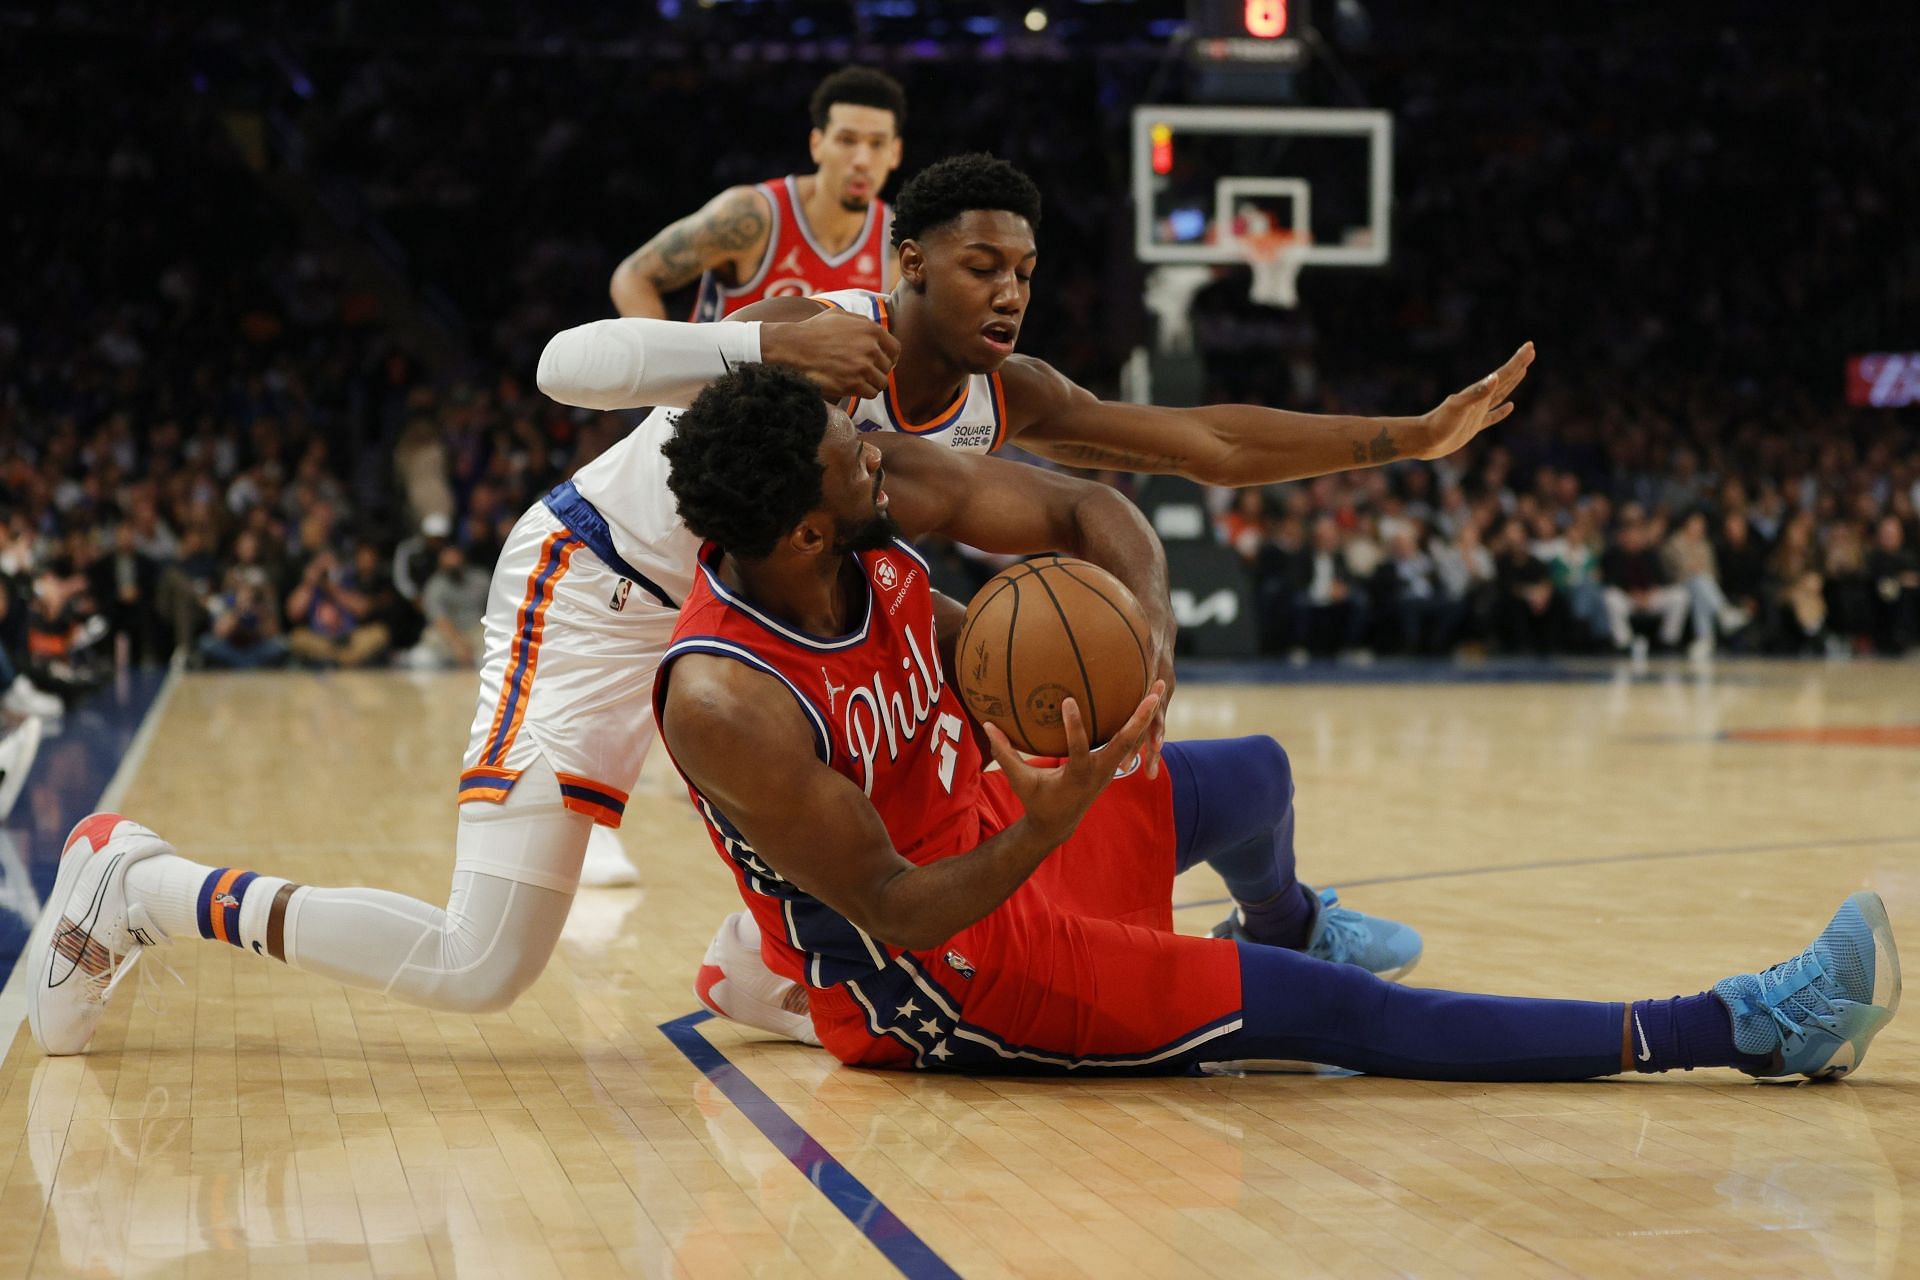 The New York Knicks bounced back in a big way after last game&#039;s loss to topple the Philadelphia 76ers